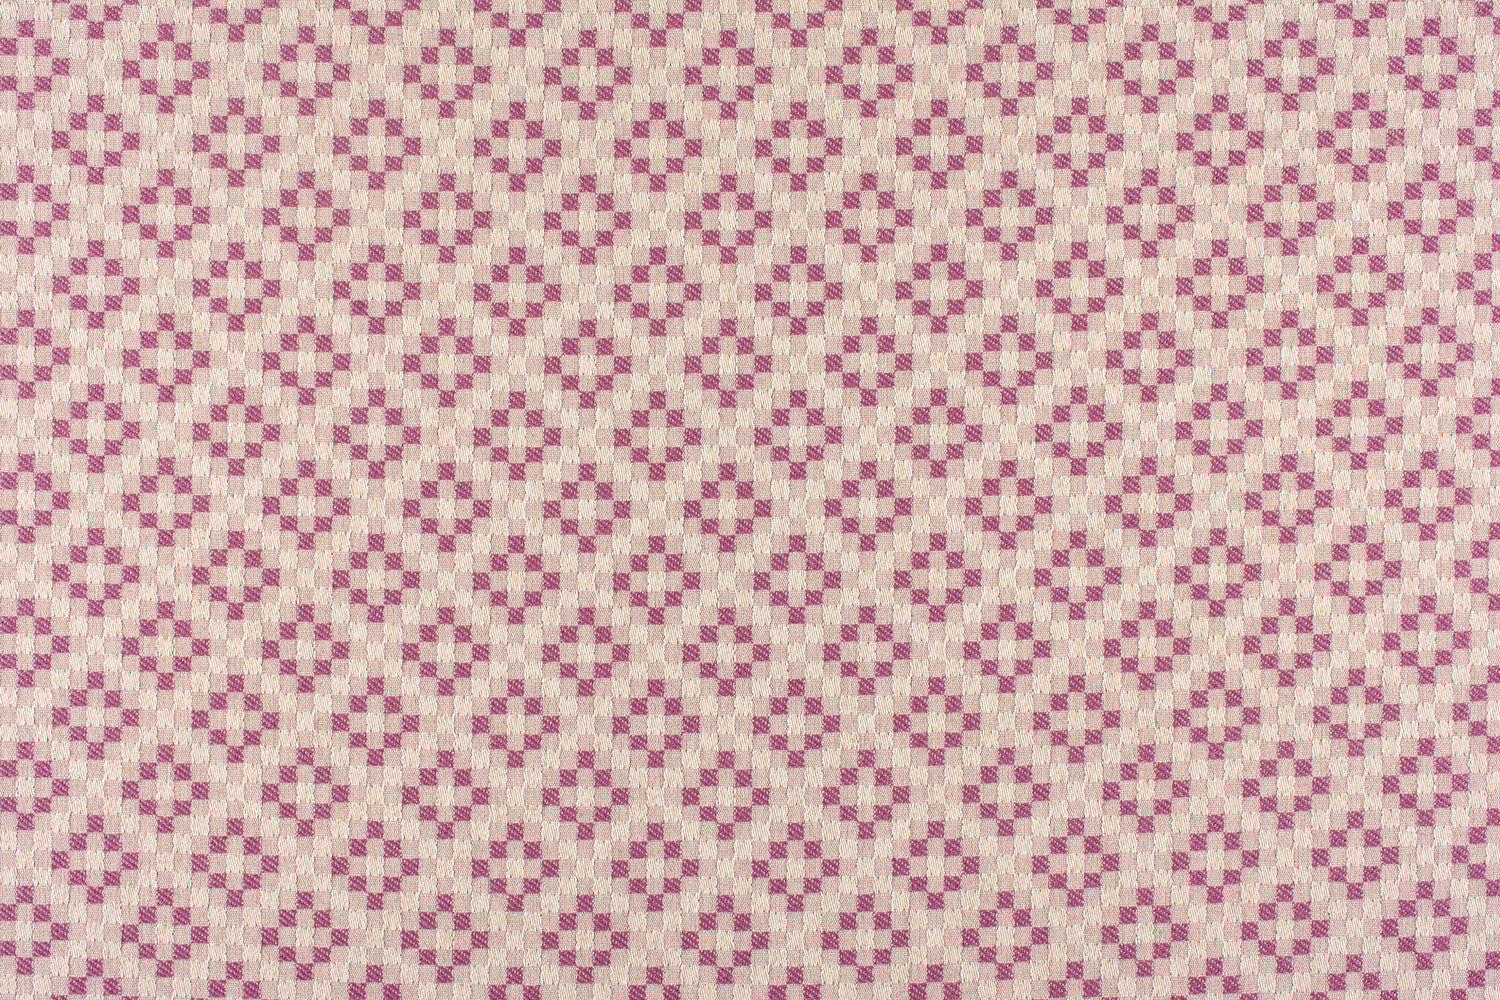 Lorcan fabric in plum color - pattern number VW 0002FC01 - by Scalamandre in the Old World Weavers collection